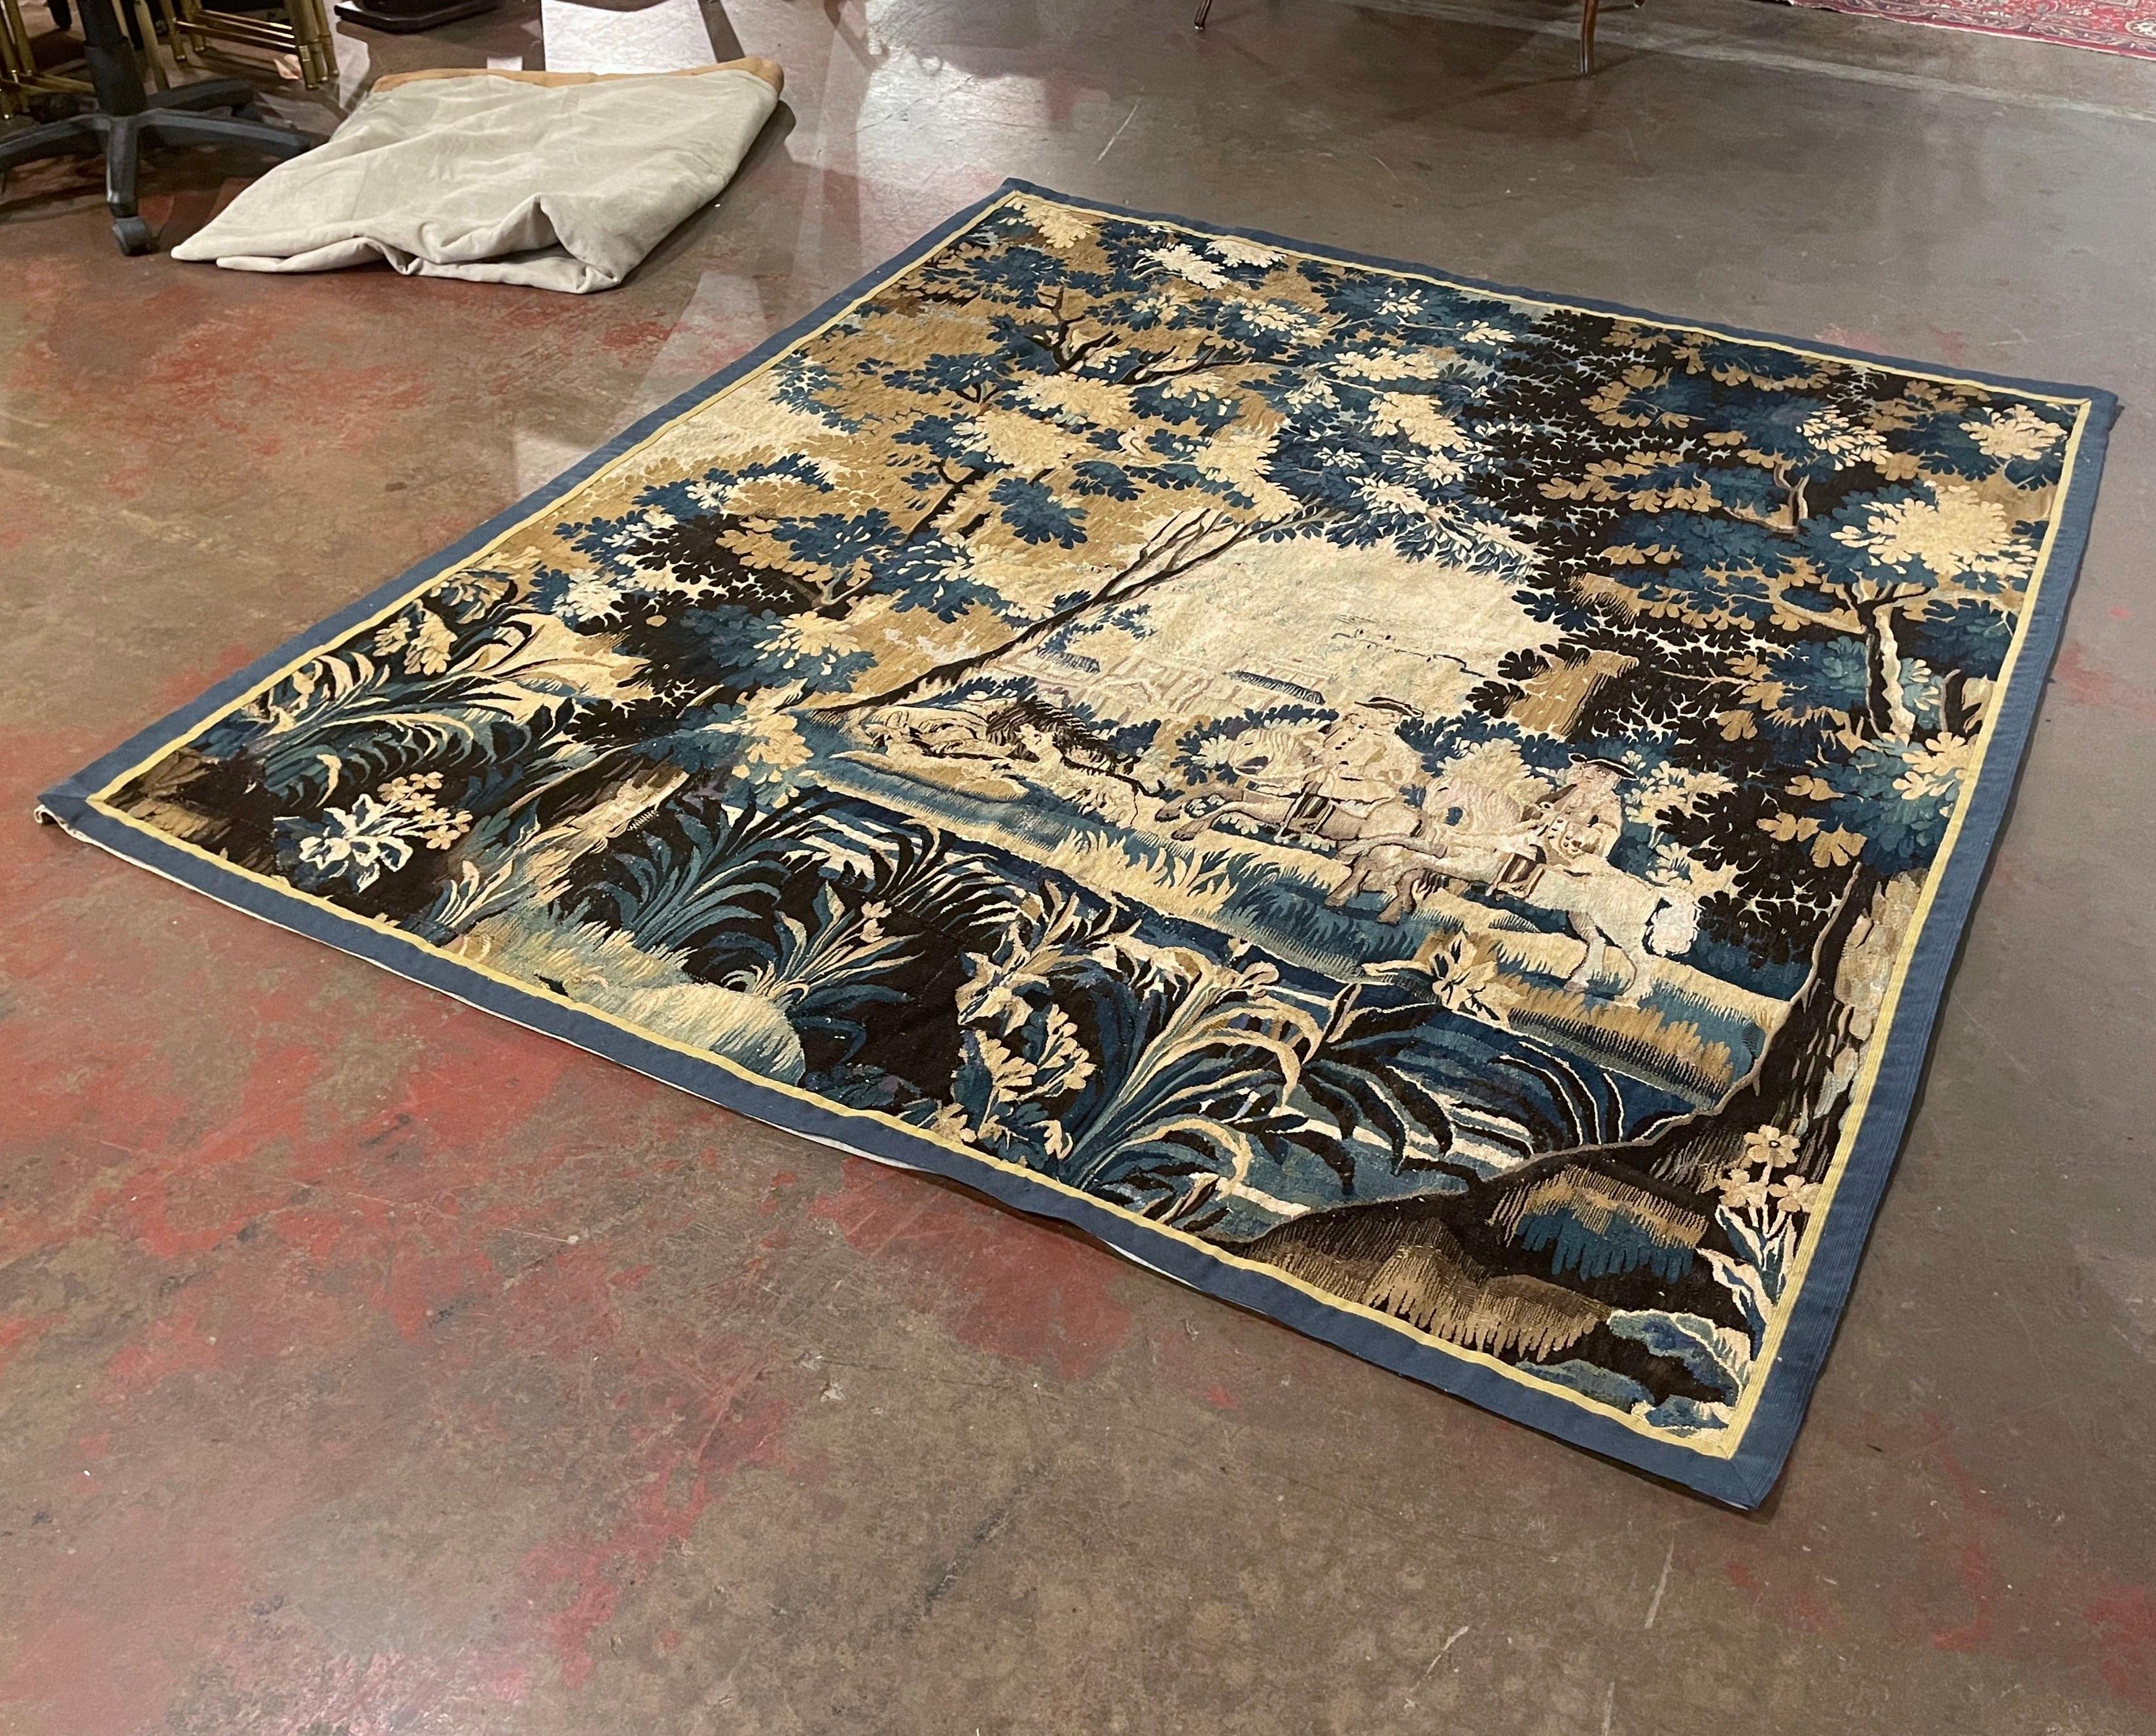 This antique tapestry was woven in Aubusson, France, circa 1760. Almost square in shape, the colorful wall decor depicts a hunting scene with a two noblemen on horseback chasing a wild boar with two dogs, embellished with trees, foliage, and a